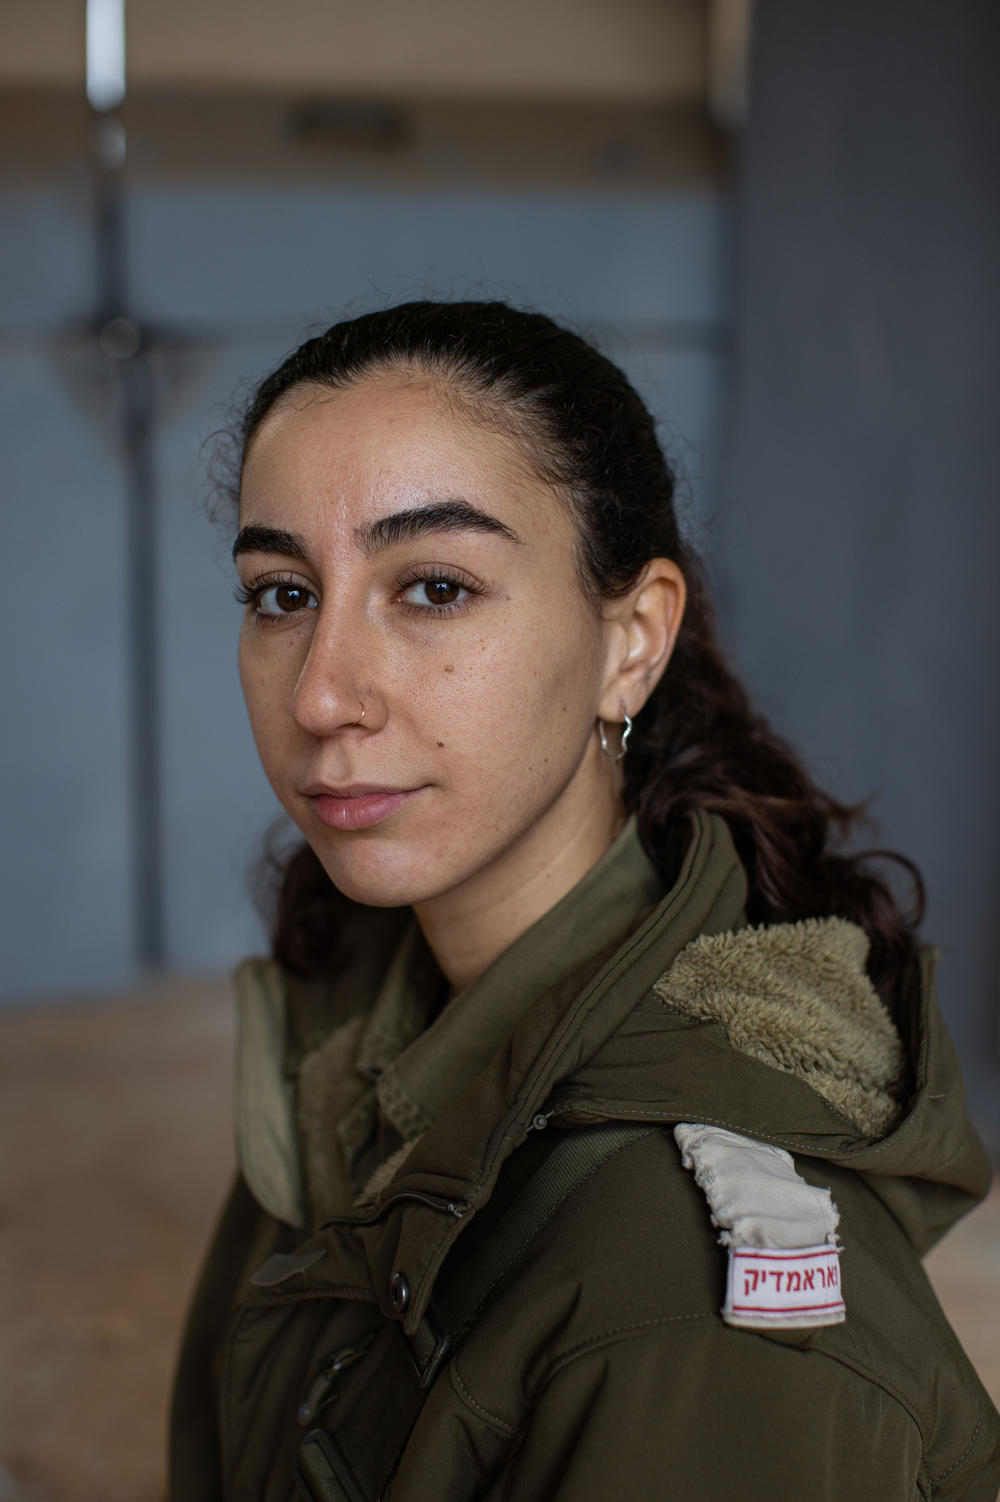 Zohar Ben Shushan, an Israeli military reservist and paramedic, sits for a portrait at a military base near the border with Lebanon in northern Israel on Nov. 28.